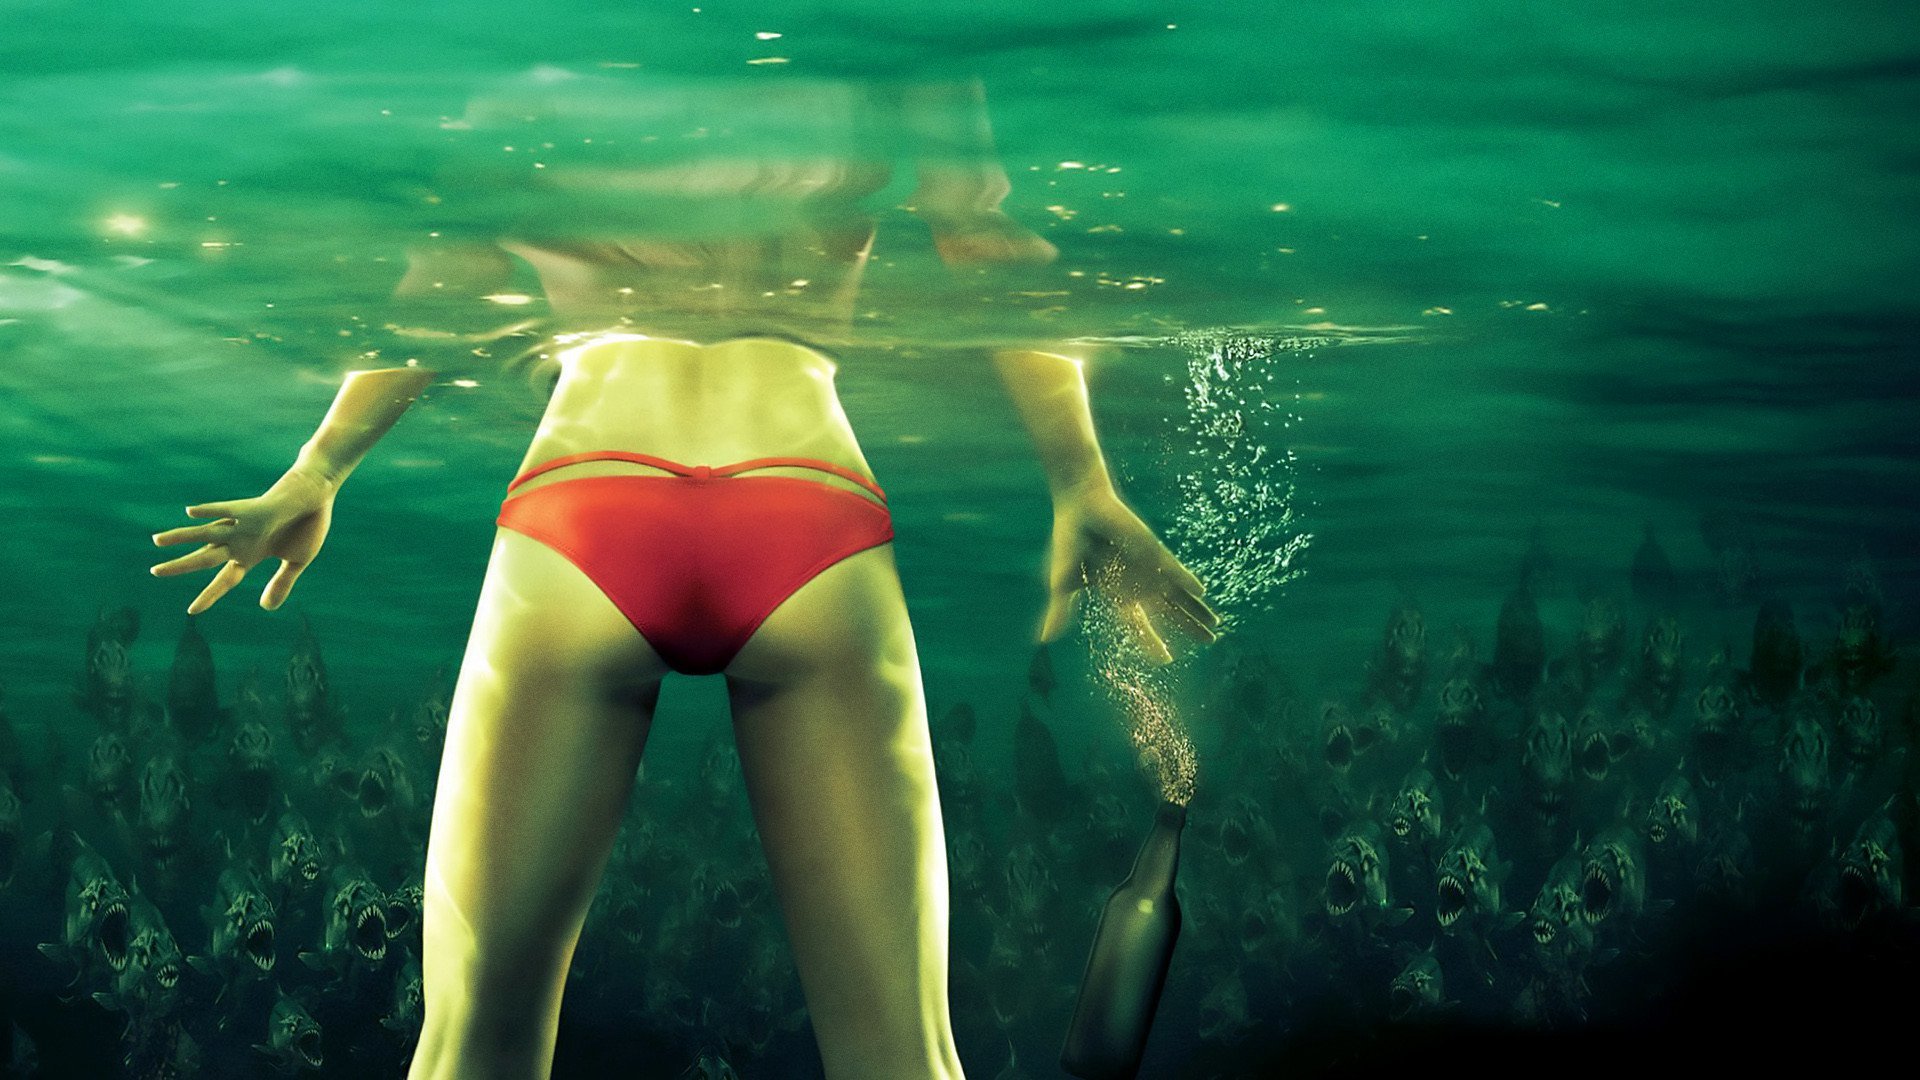 Download 1080p Piranha 3d PC background ID:233911 for free